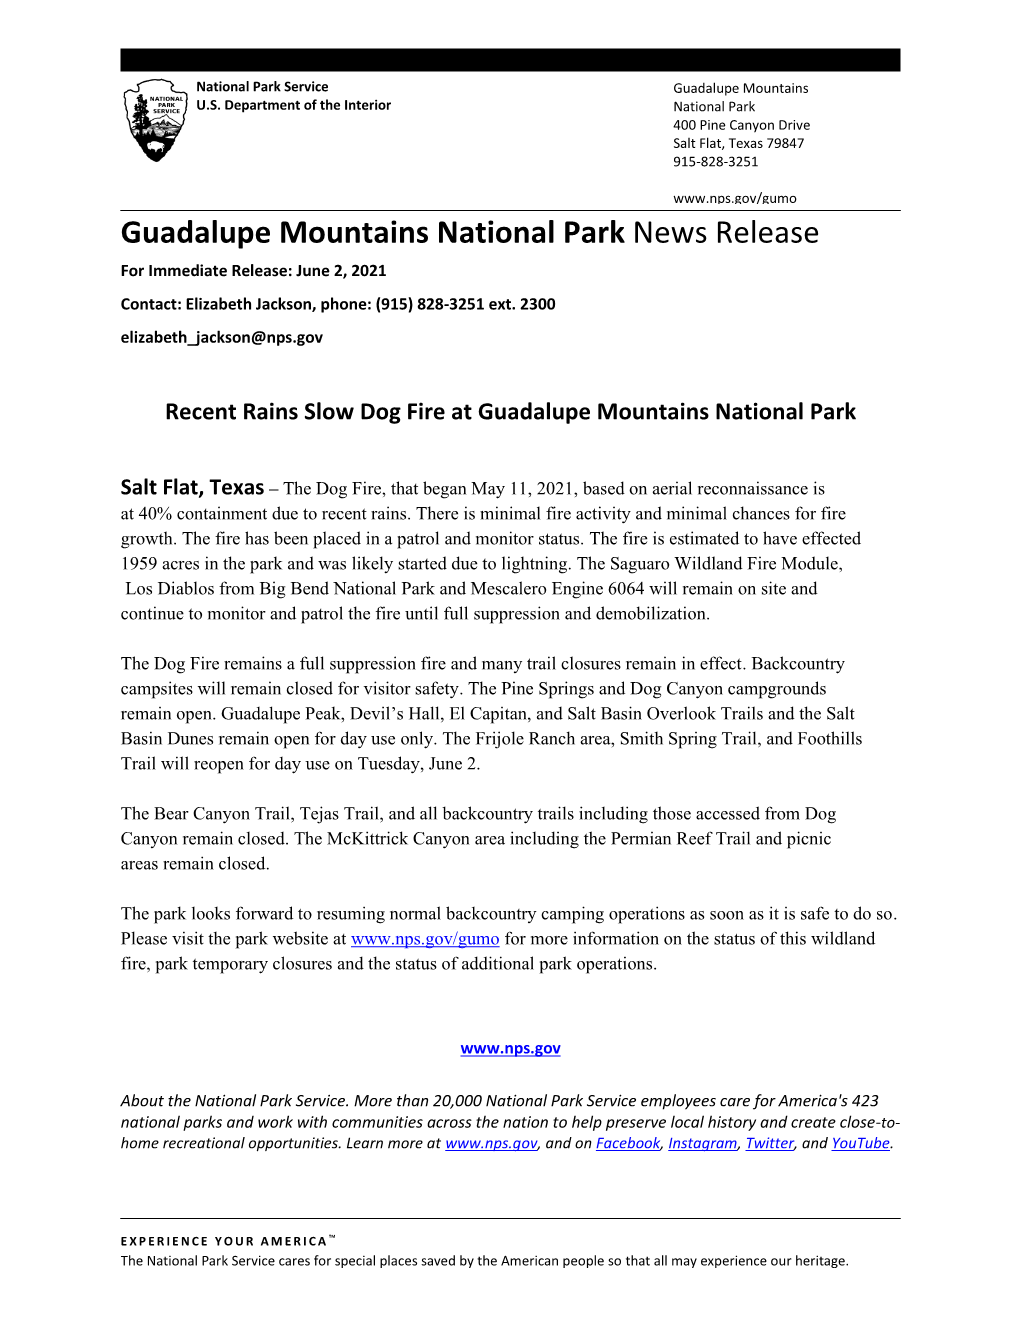 Guadalupe Mountains National Park News Release for Immediate Release: June 2, 2021 Contact: Elizabeth Jackson, Phone: (915) 828-3251 Ext